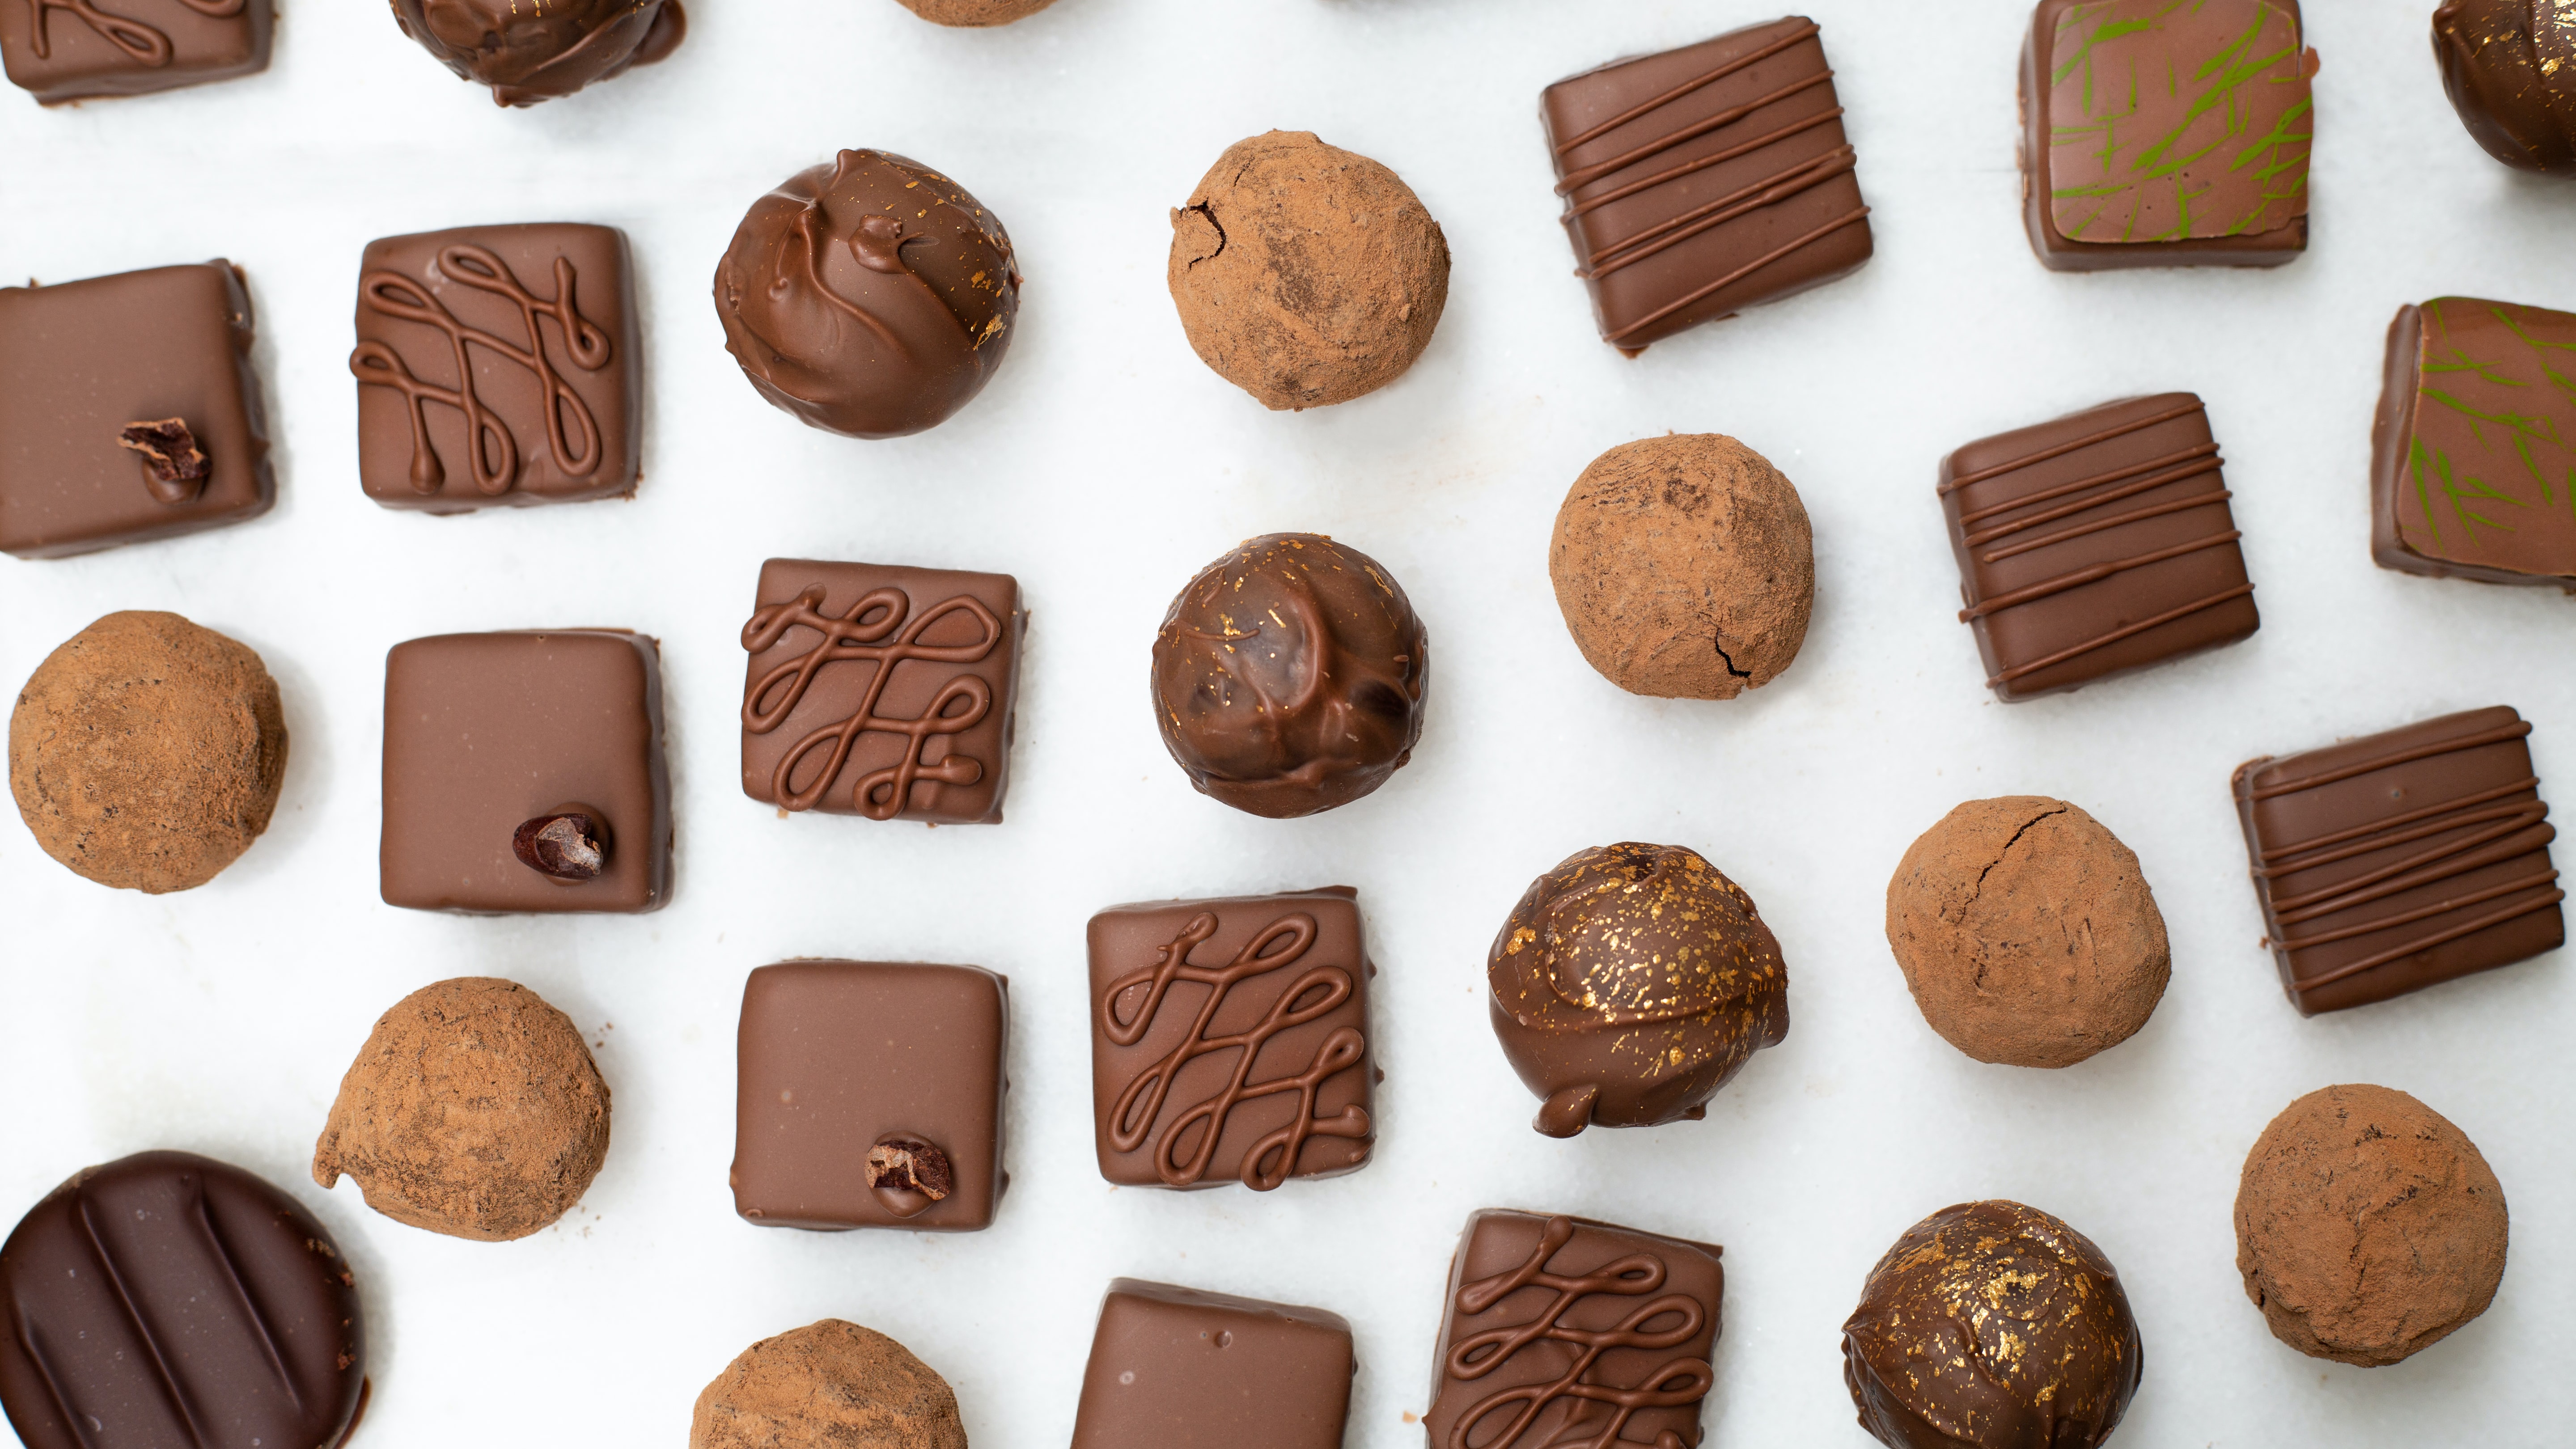 Our Top 6 British-made Indie Chocolate Brands